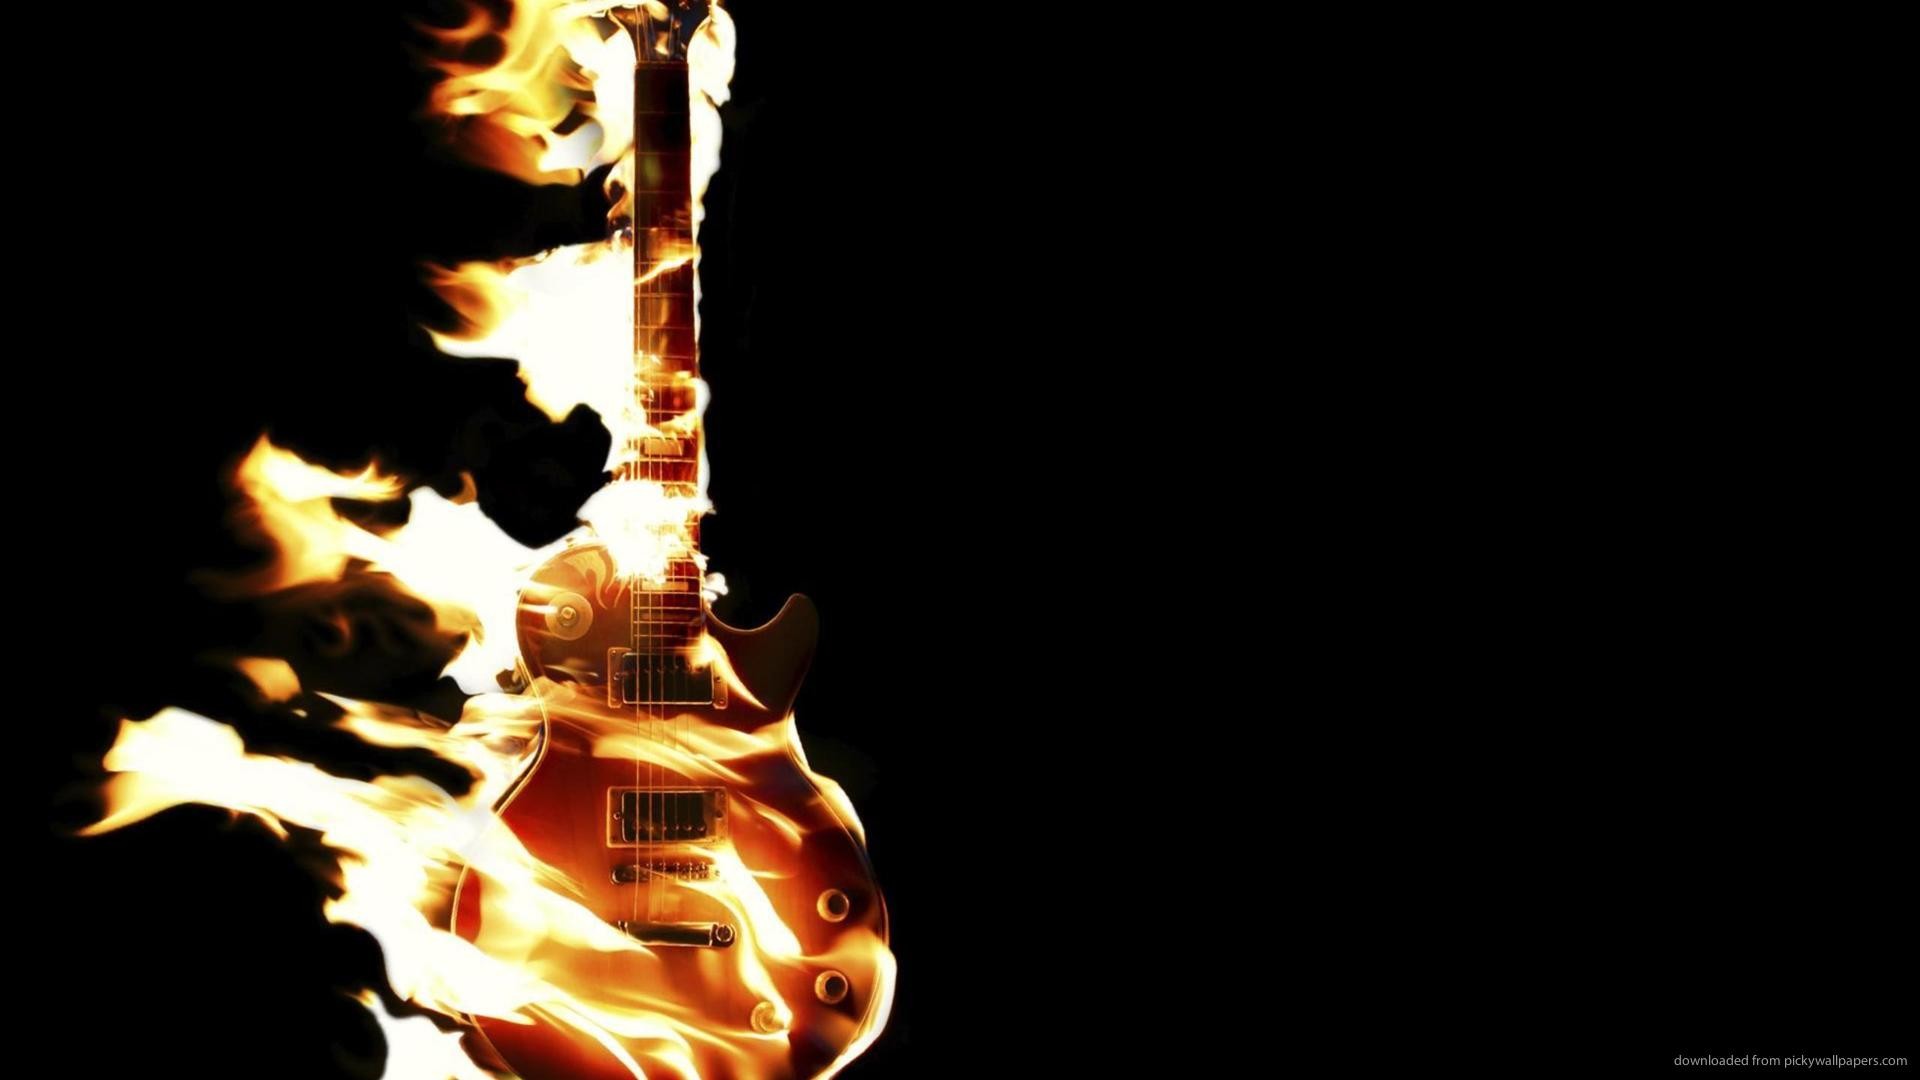 1920x1080 Burning Guitar picture